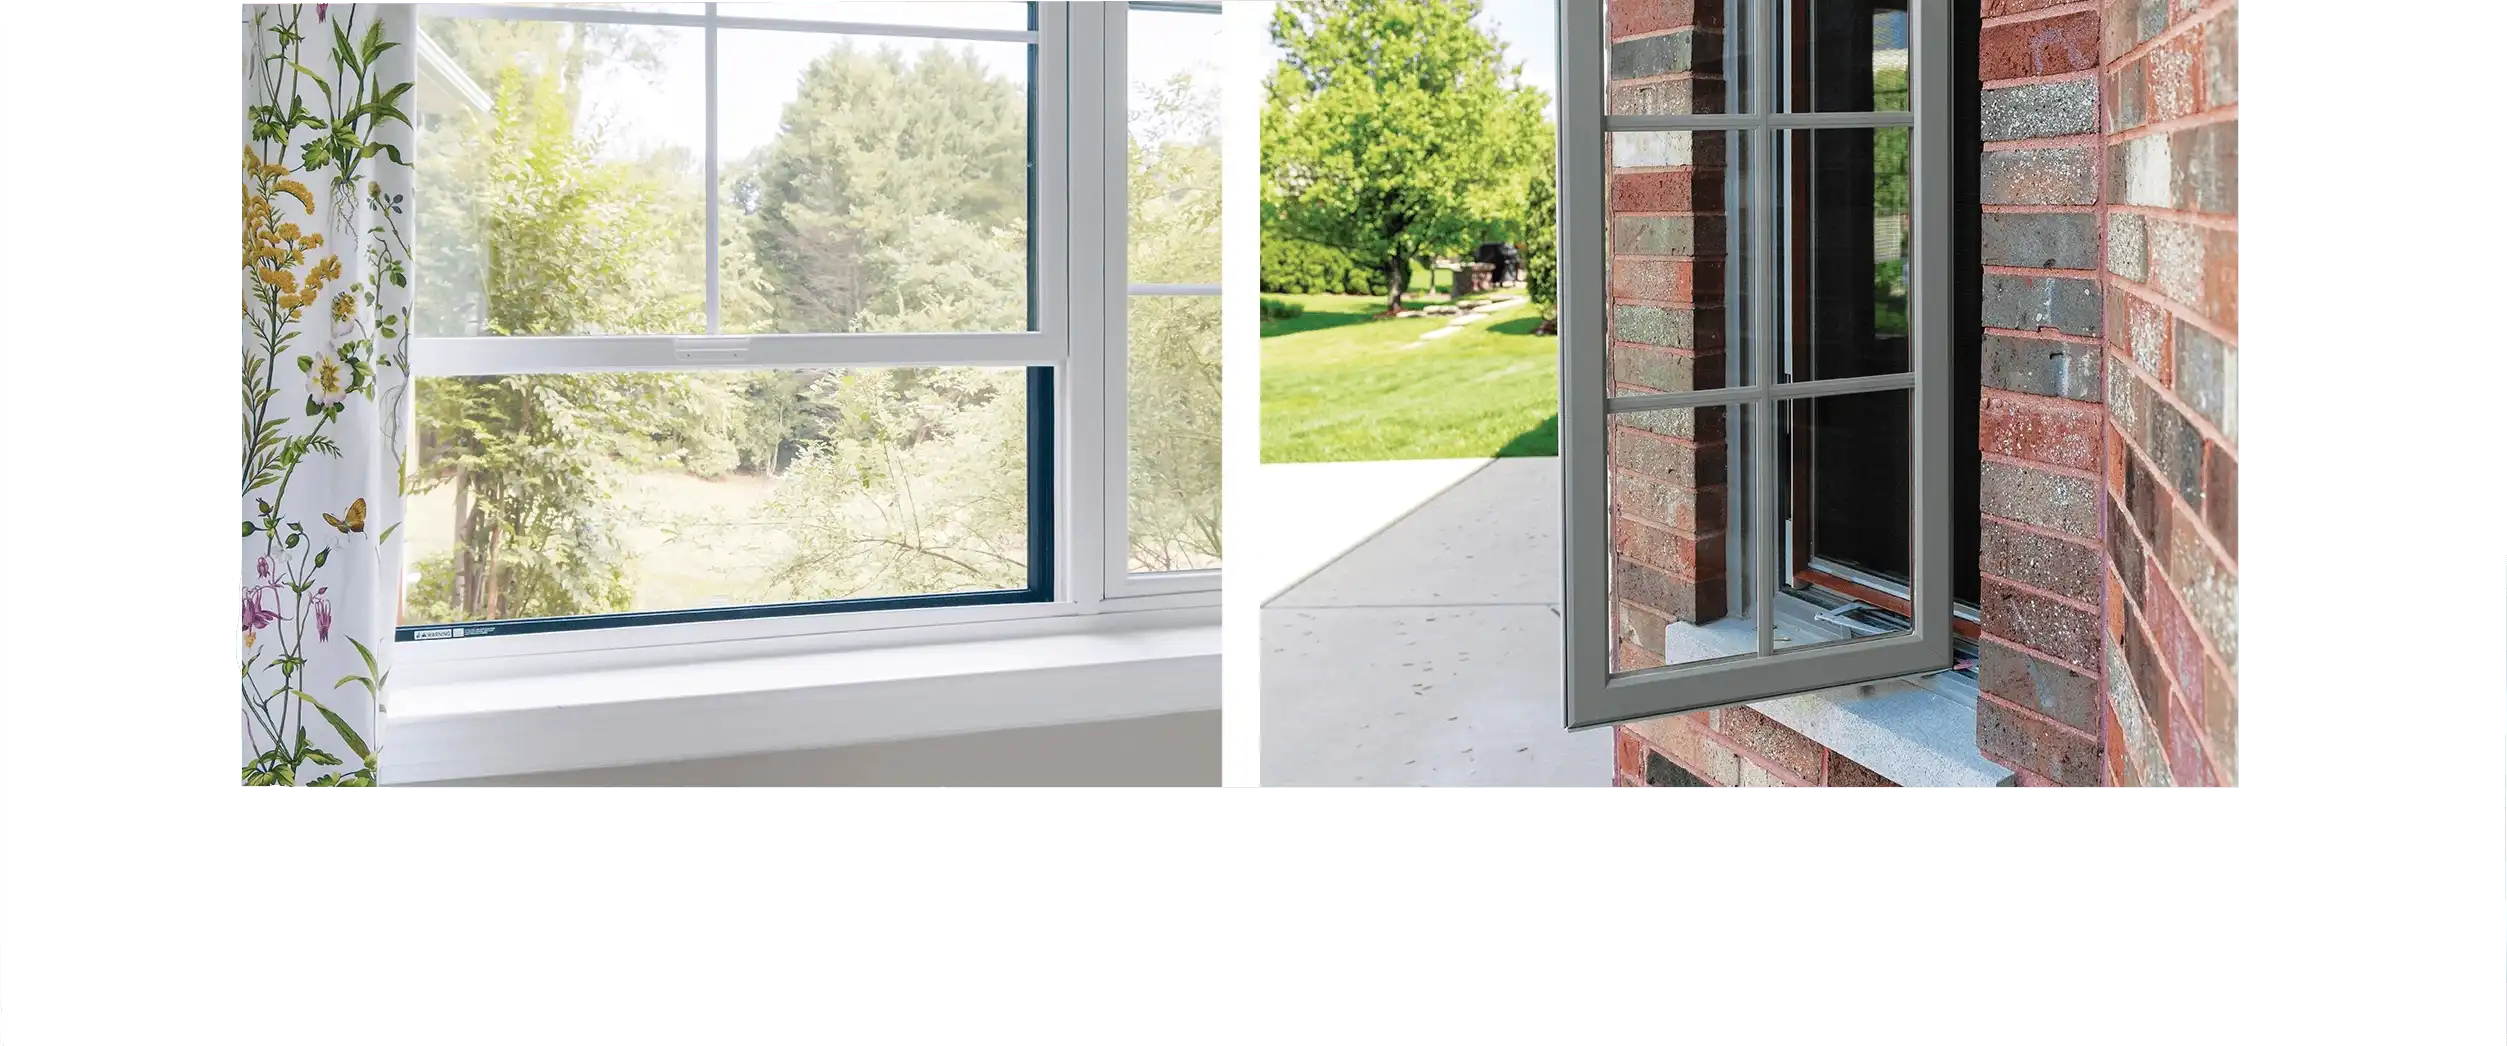 Double hung window on the left and a casement window on the right